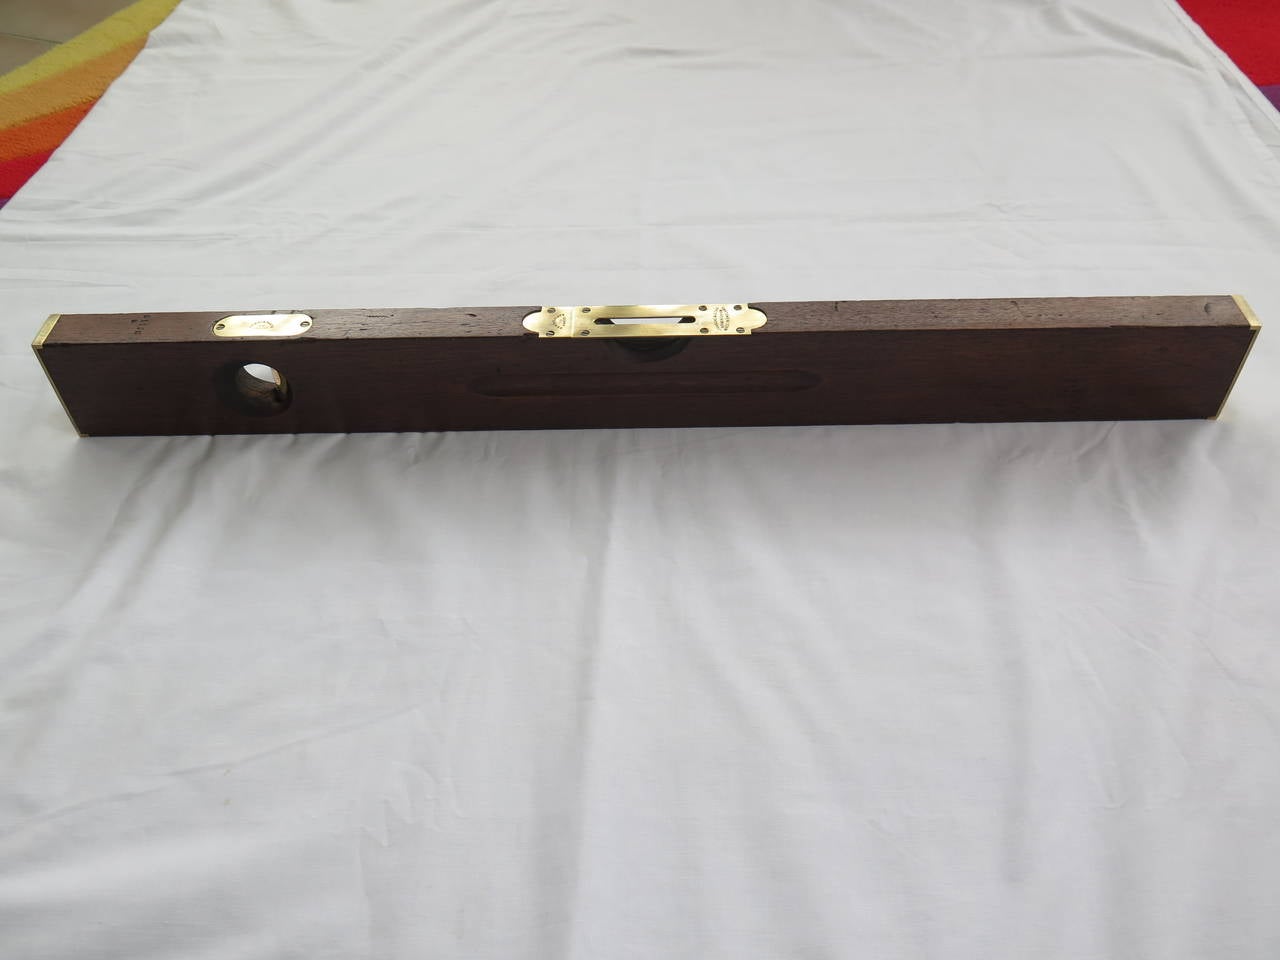 This is a very good quality architects or builders spirit level by the well established firm of J. Rabone & Sons, Birmingham, England.

At 30 inches long, this was one of their longer spirit levels at the time and has a solid mahogany frame with